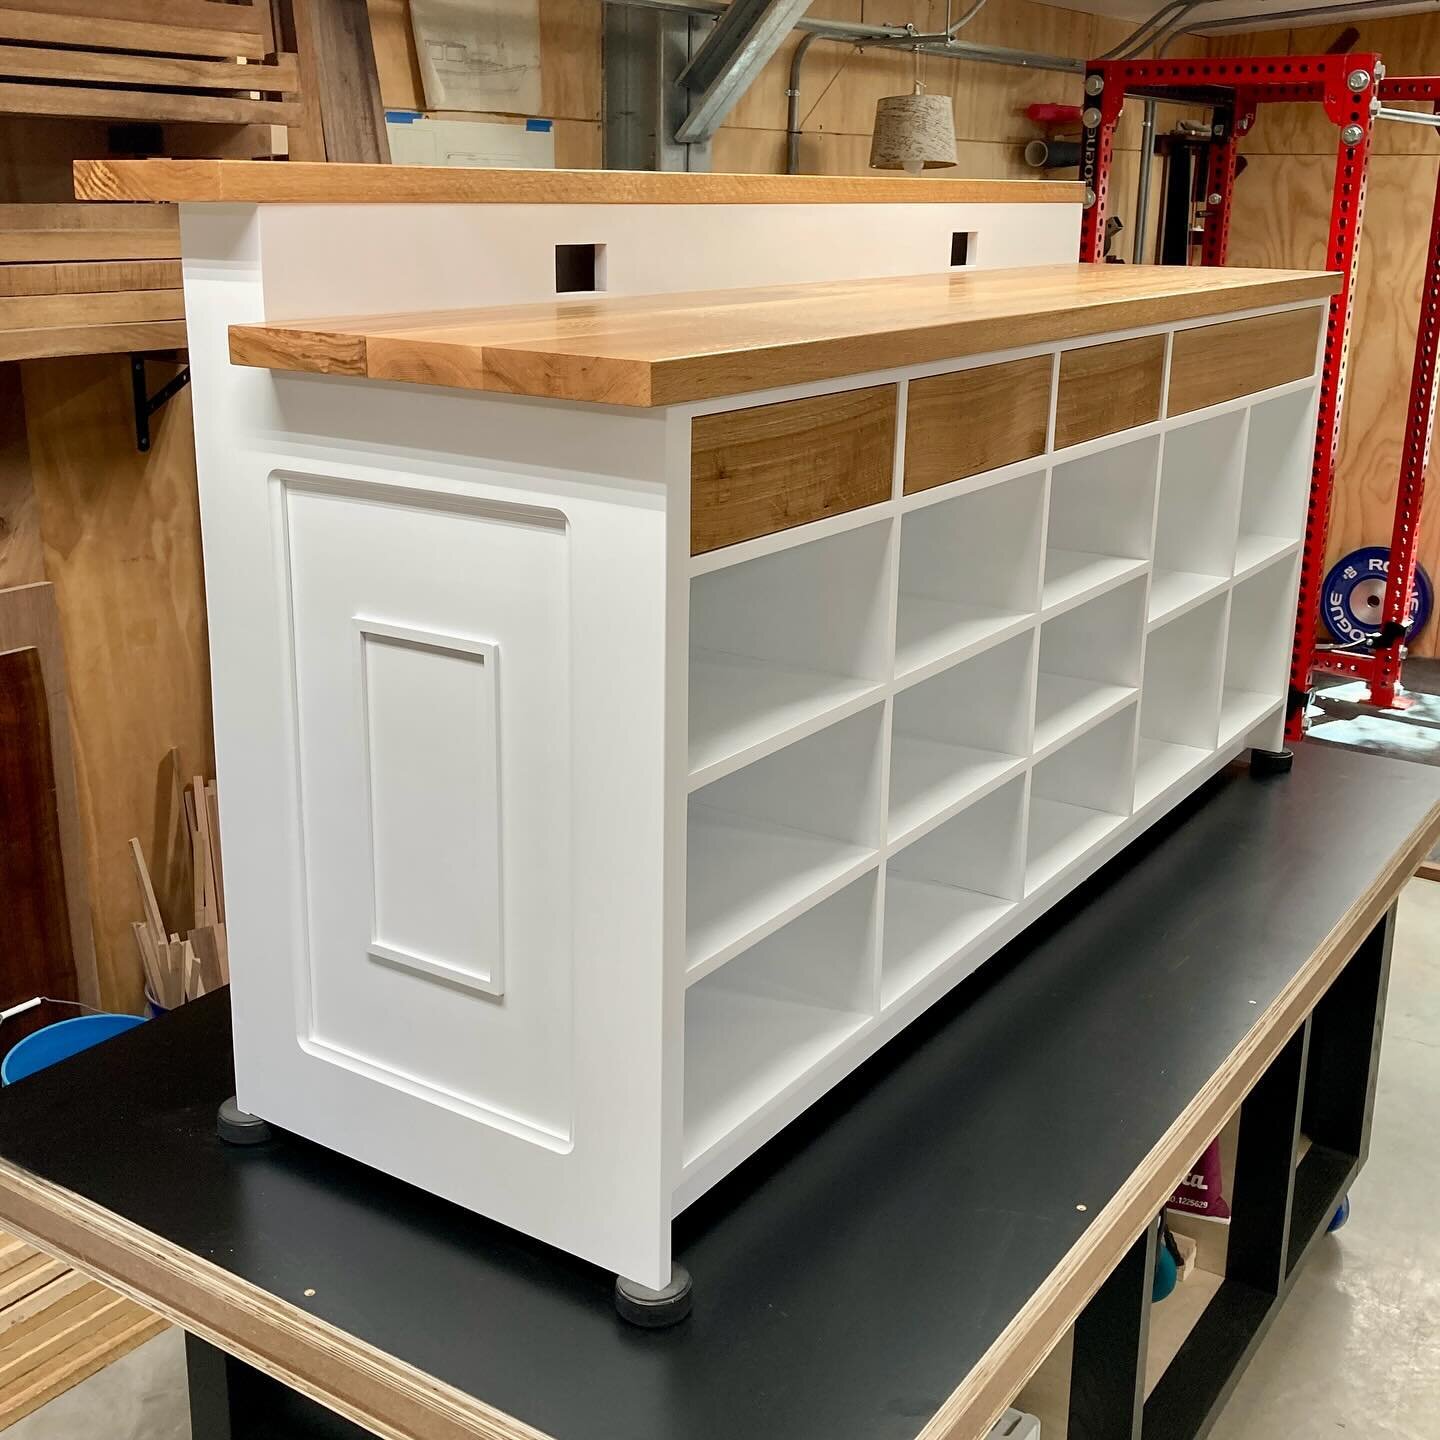 VVF&rsquo;s first commercial project. Custom wrap for a new boutique downtown. The casework is maple and ply in white poly, and the counters and drawer fronts are white oak. If I get some photos of it in its home, I&rsquo;ll share.

.
.
.
#vvfurnitur